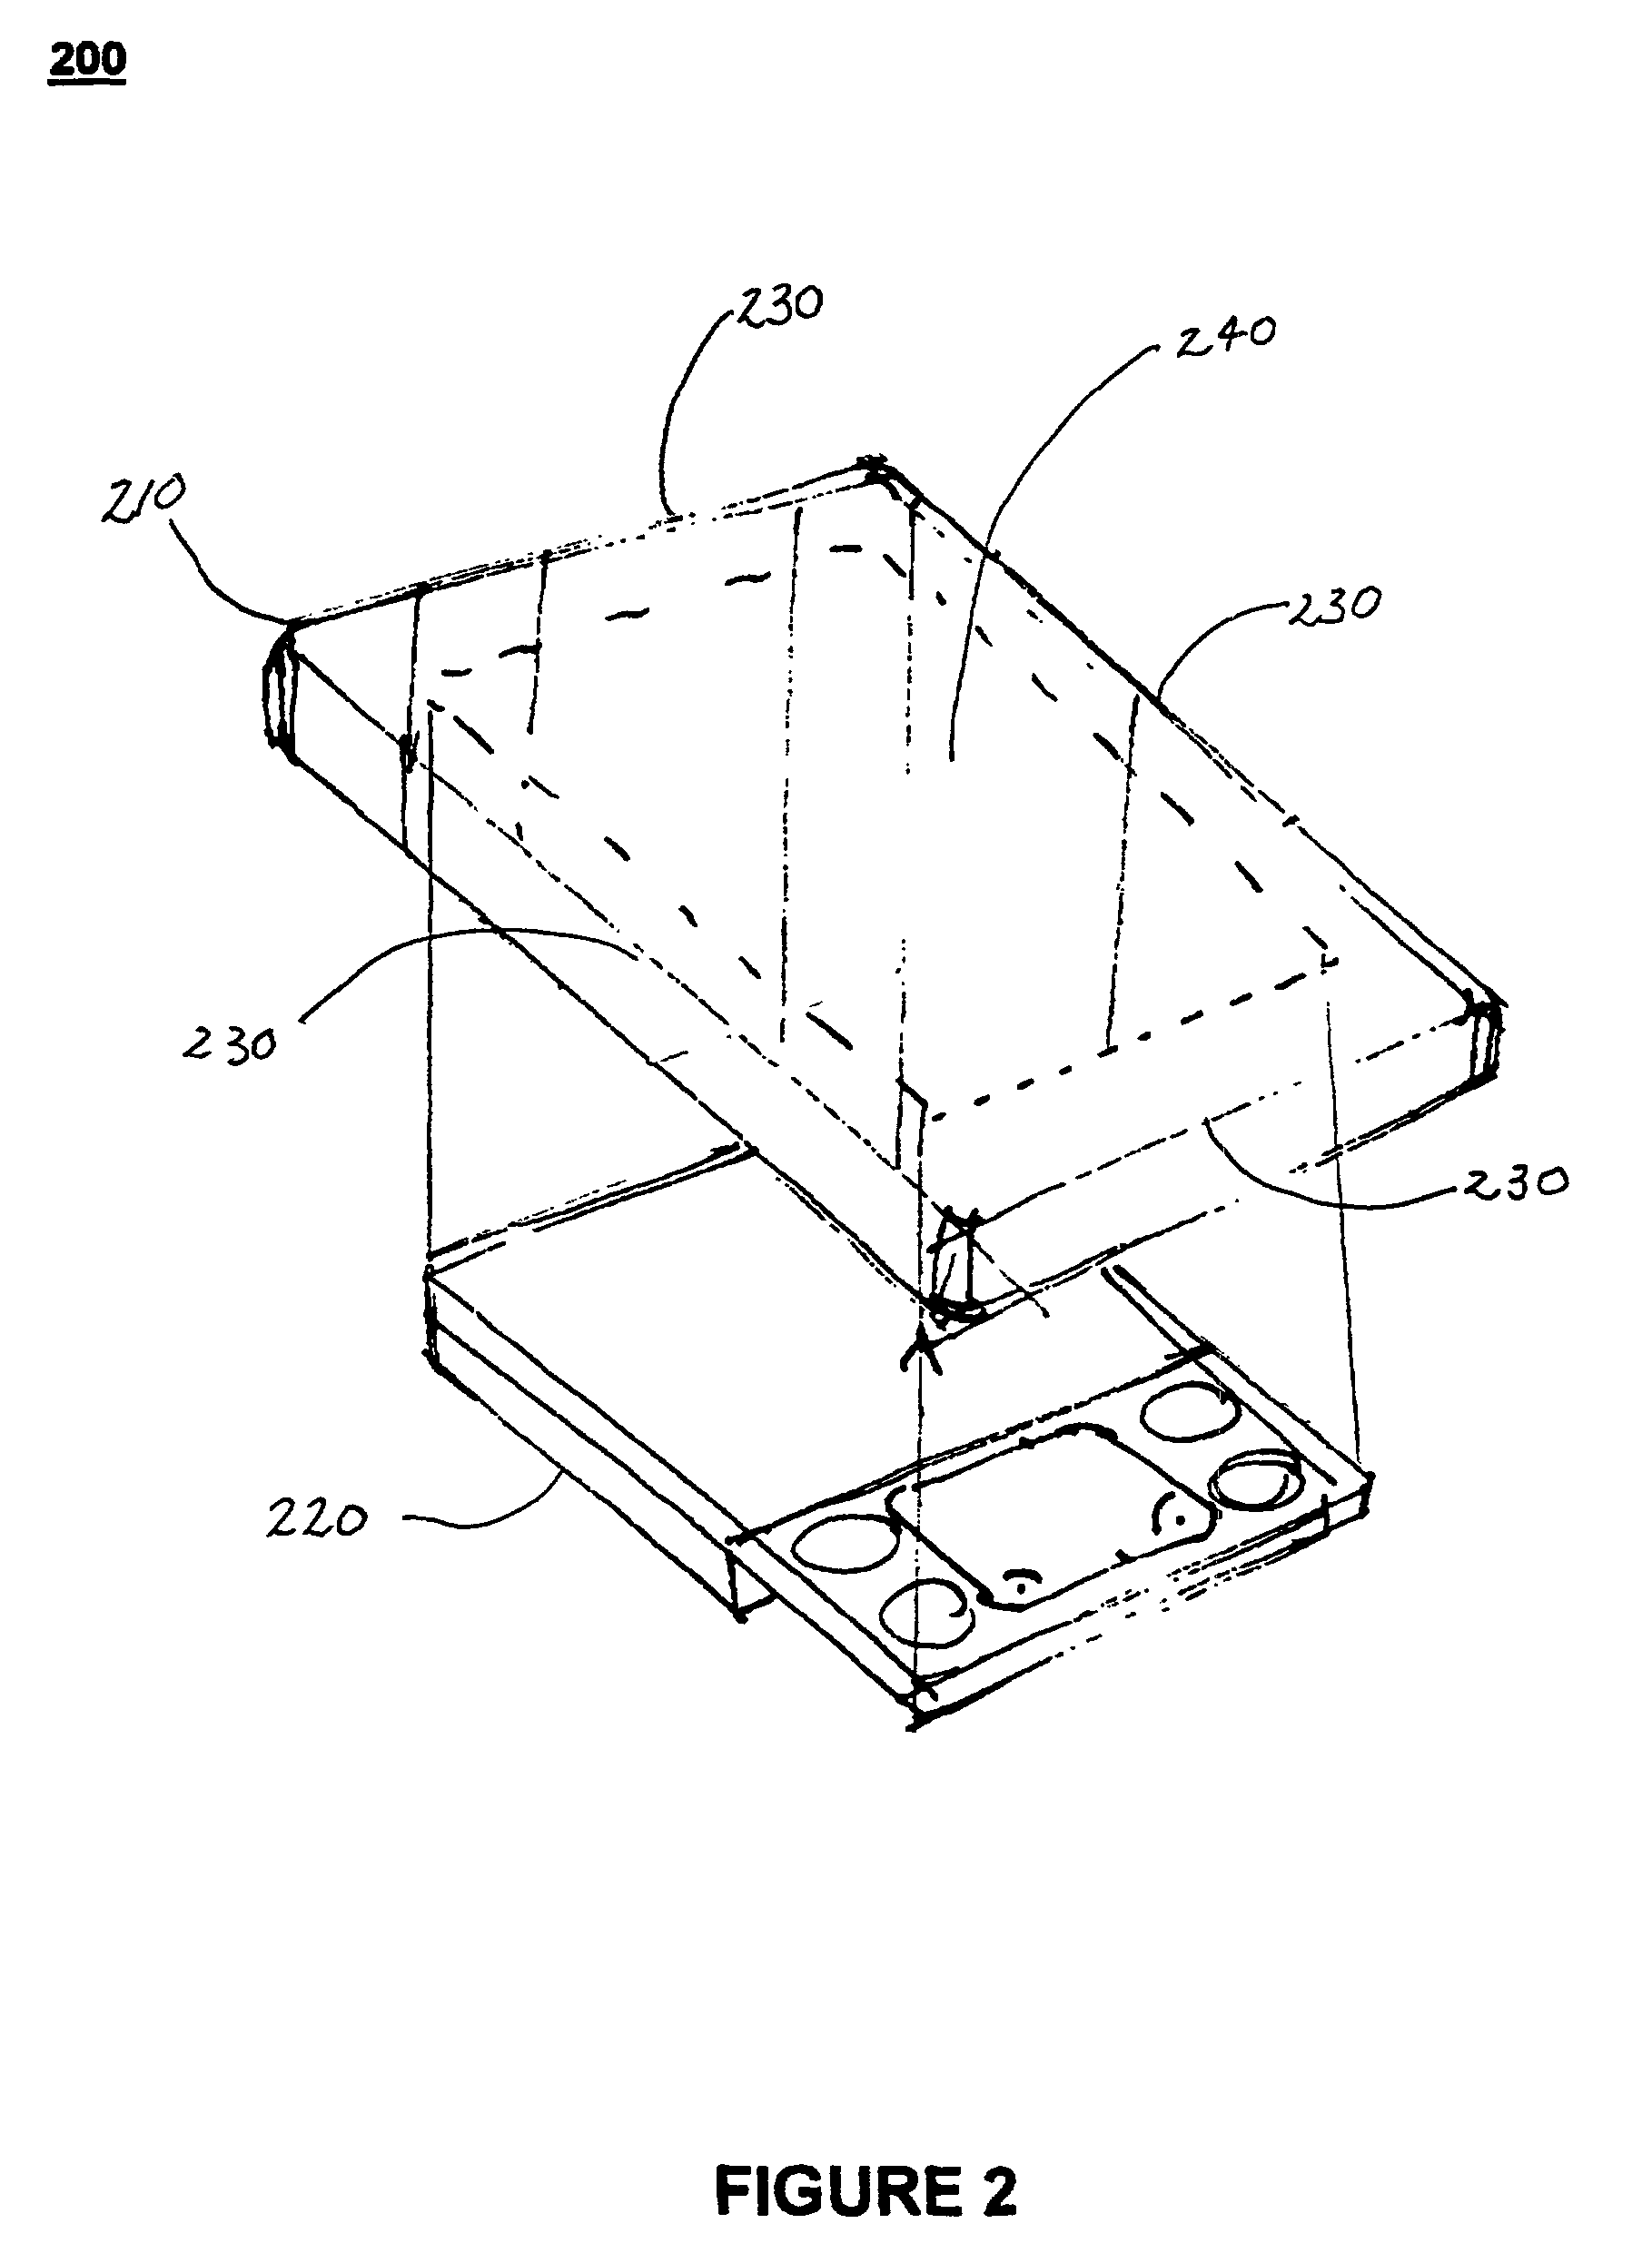 Integrated enclosure/touch screen assembly